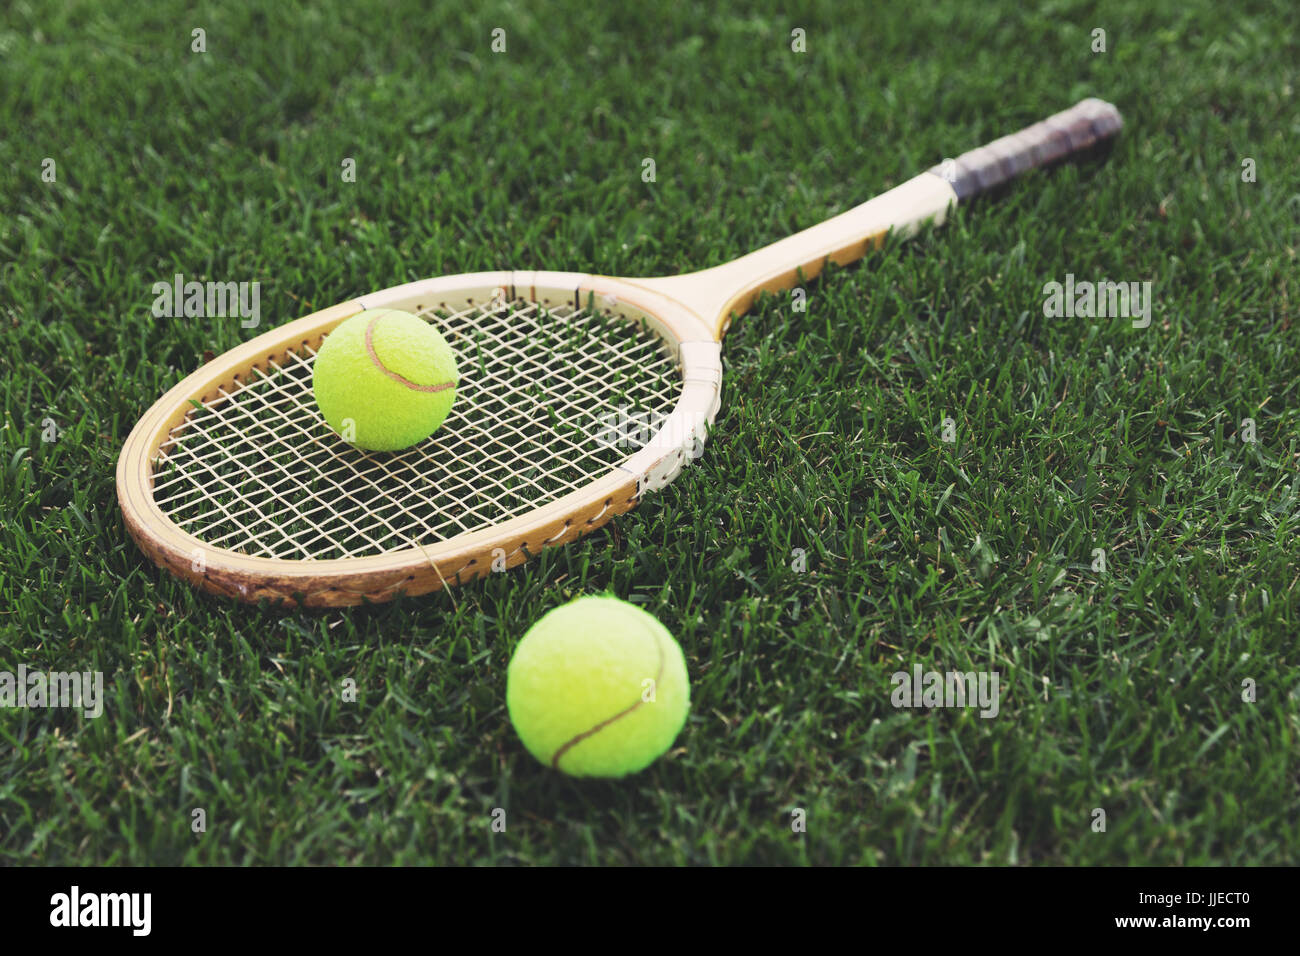 vintage wooden tennis racket on grass with balls Stock Photo